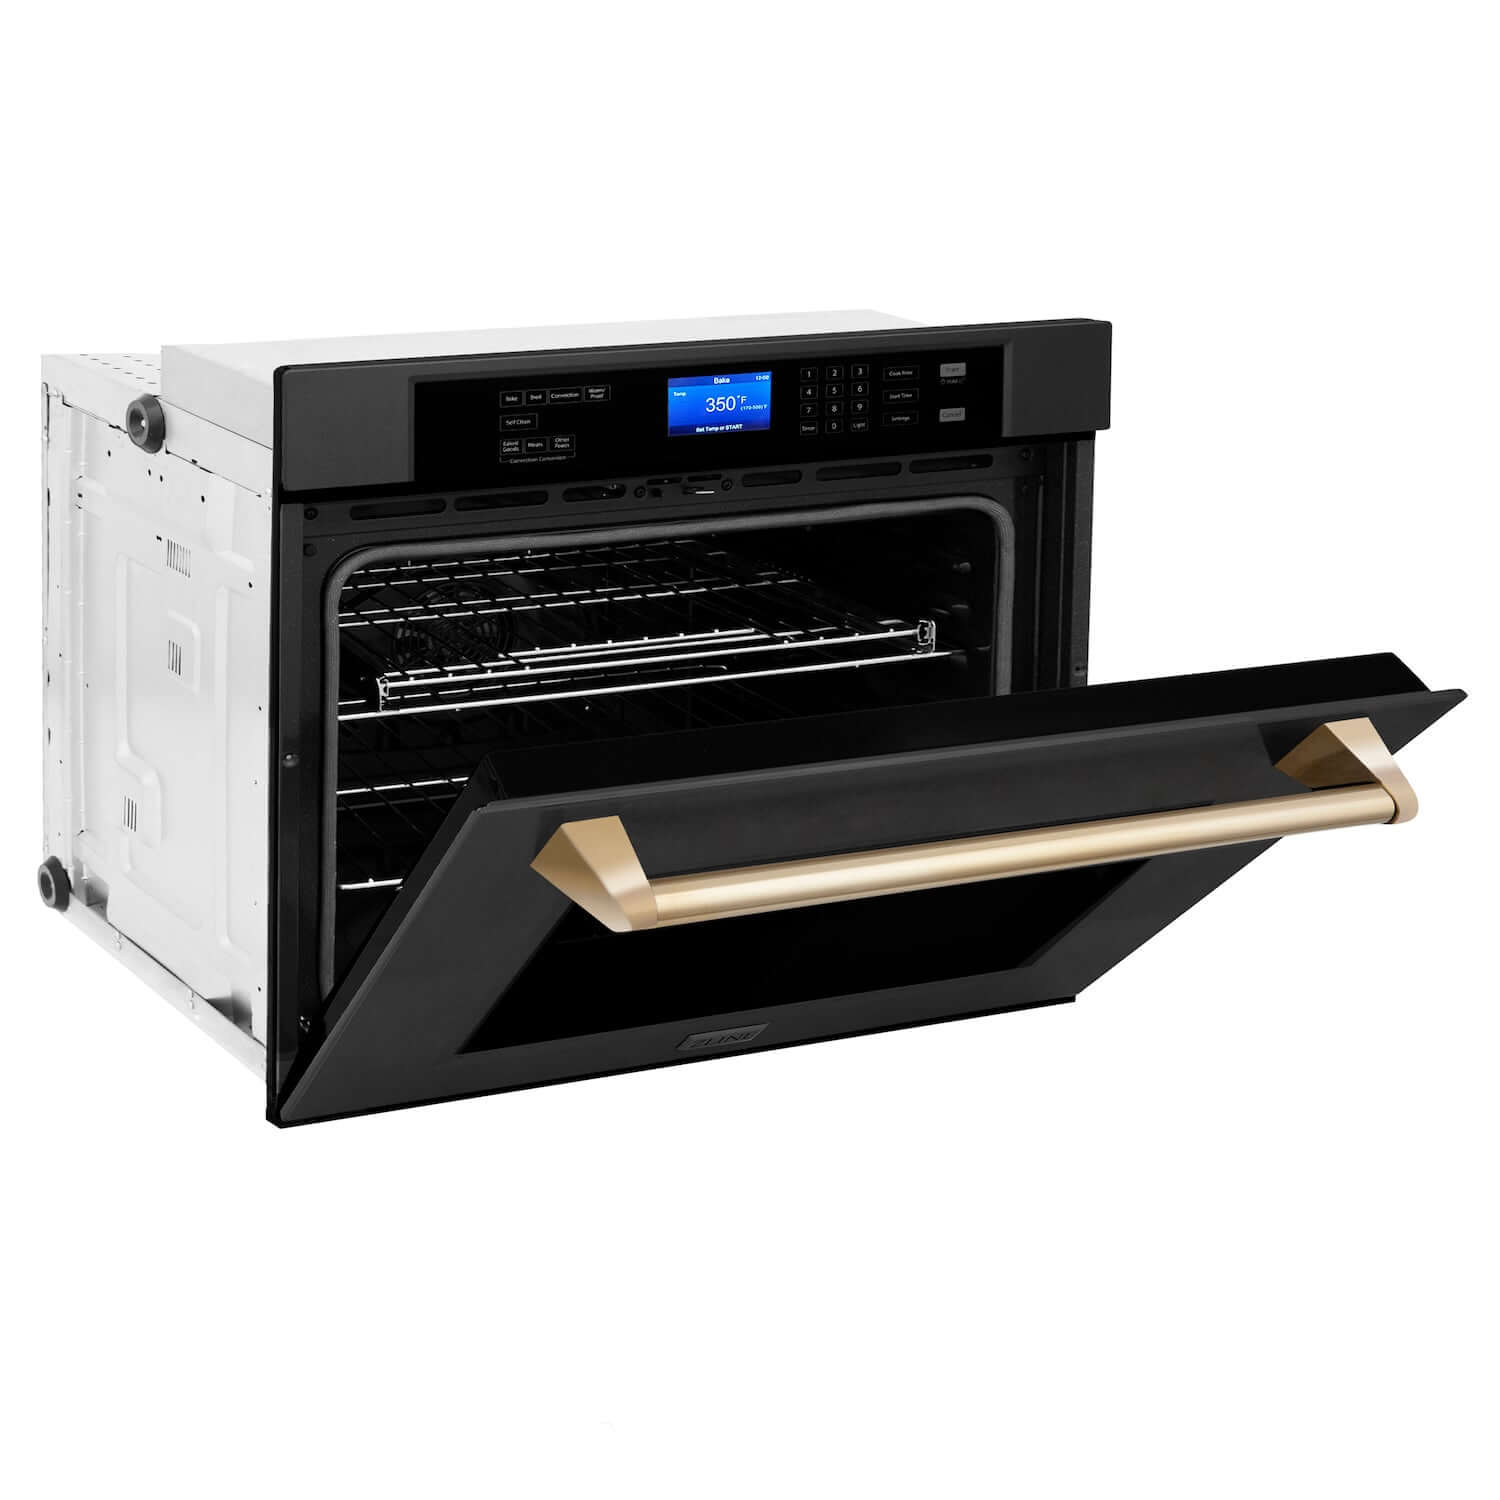 ZLINE 30 in. Autograph Edition Single Wall Oven with Self Clean and True Convection in Black Stainless Steel and Polished Gold Accents (AWSZ-30-BS-G)